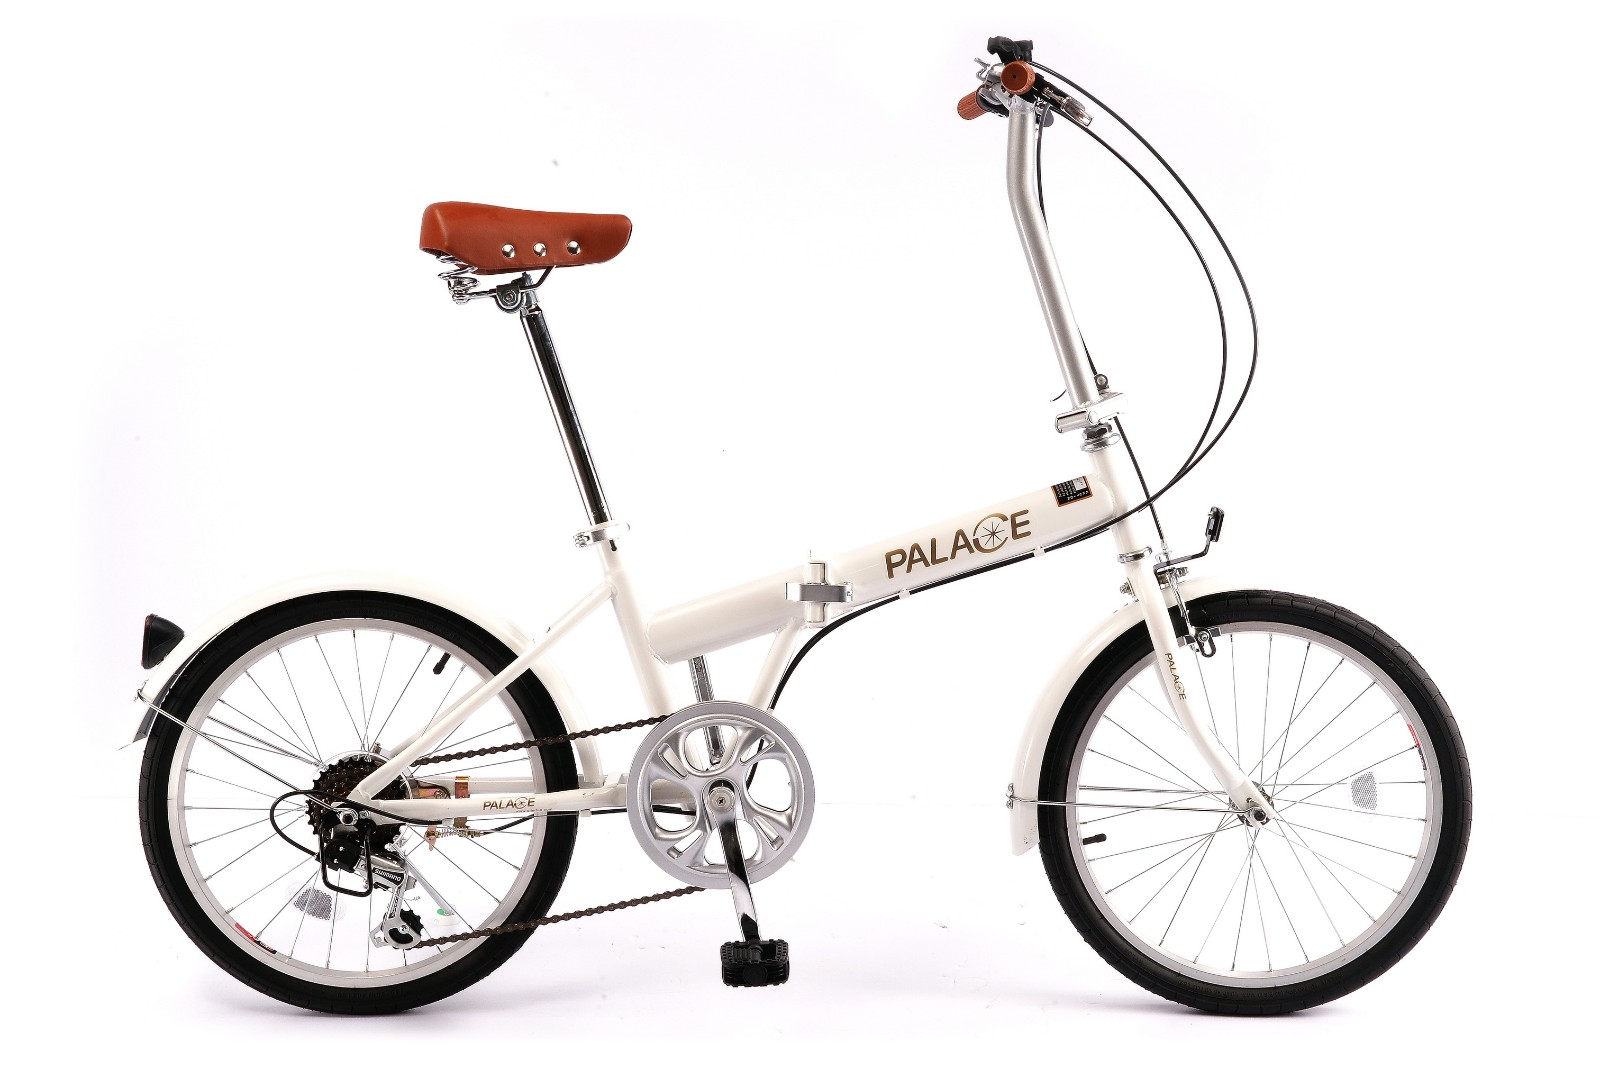 20 INCH STEEL FOLDING BICYCLE with 6 speeds